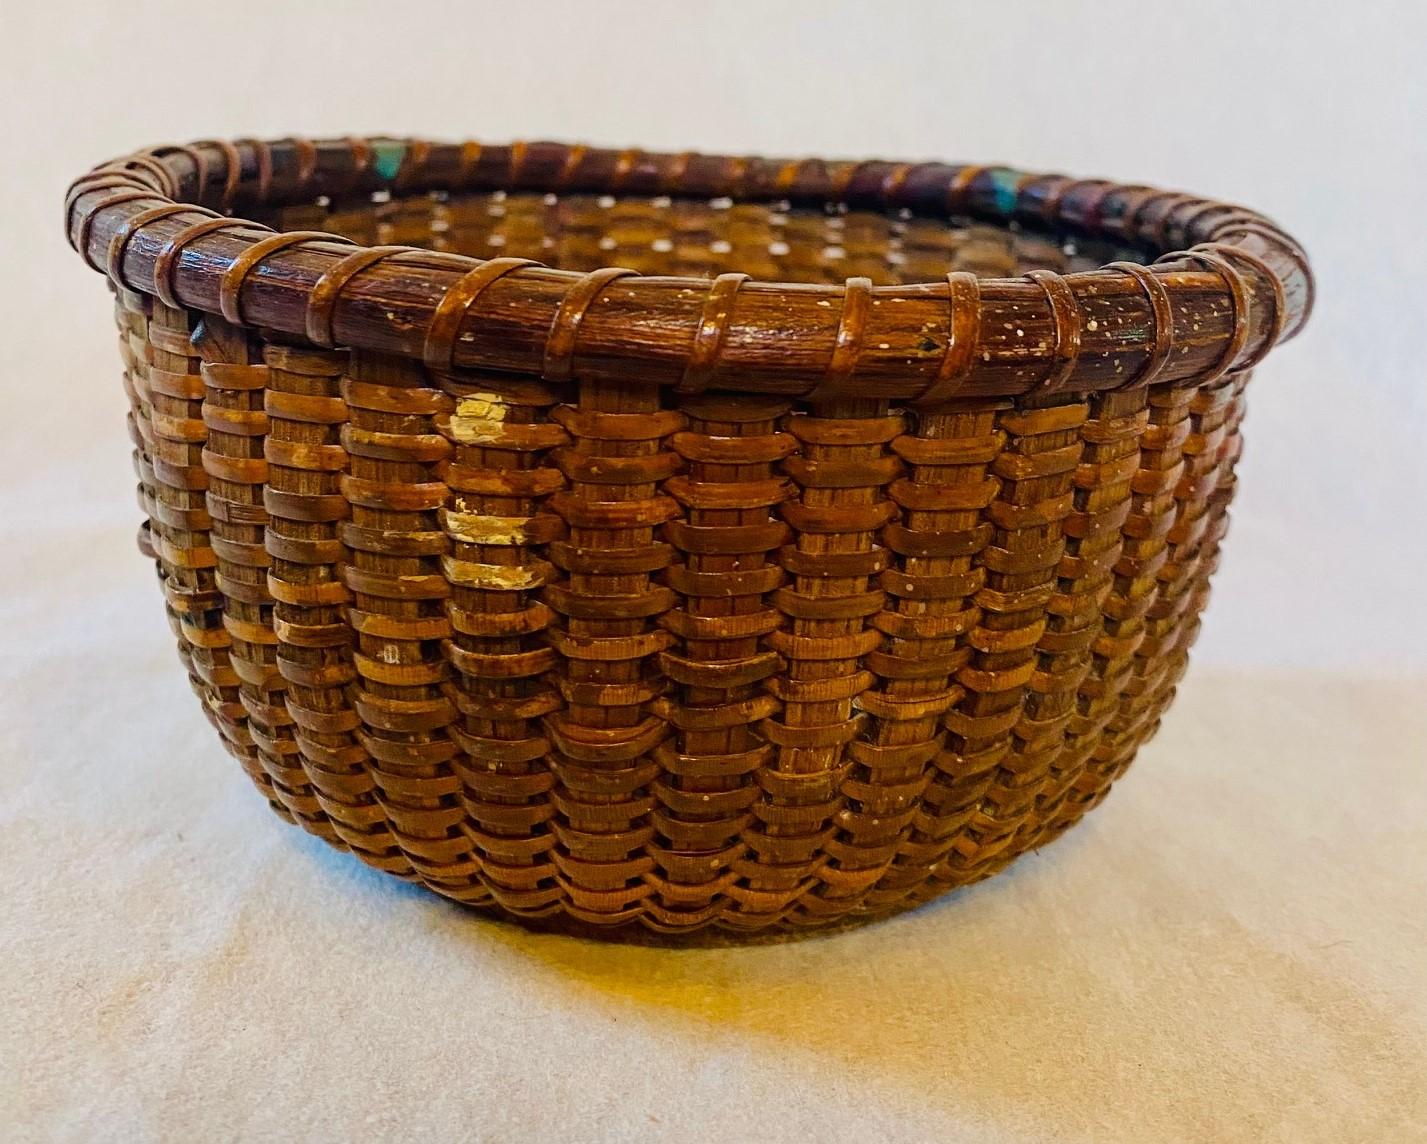 Folk Art Early 20th Century Nantucket Basket Attributed to the Coffin School, circa 1910